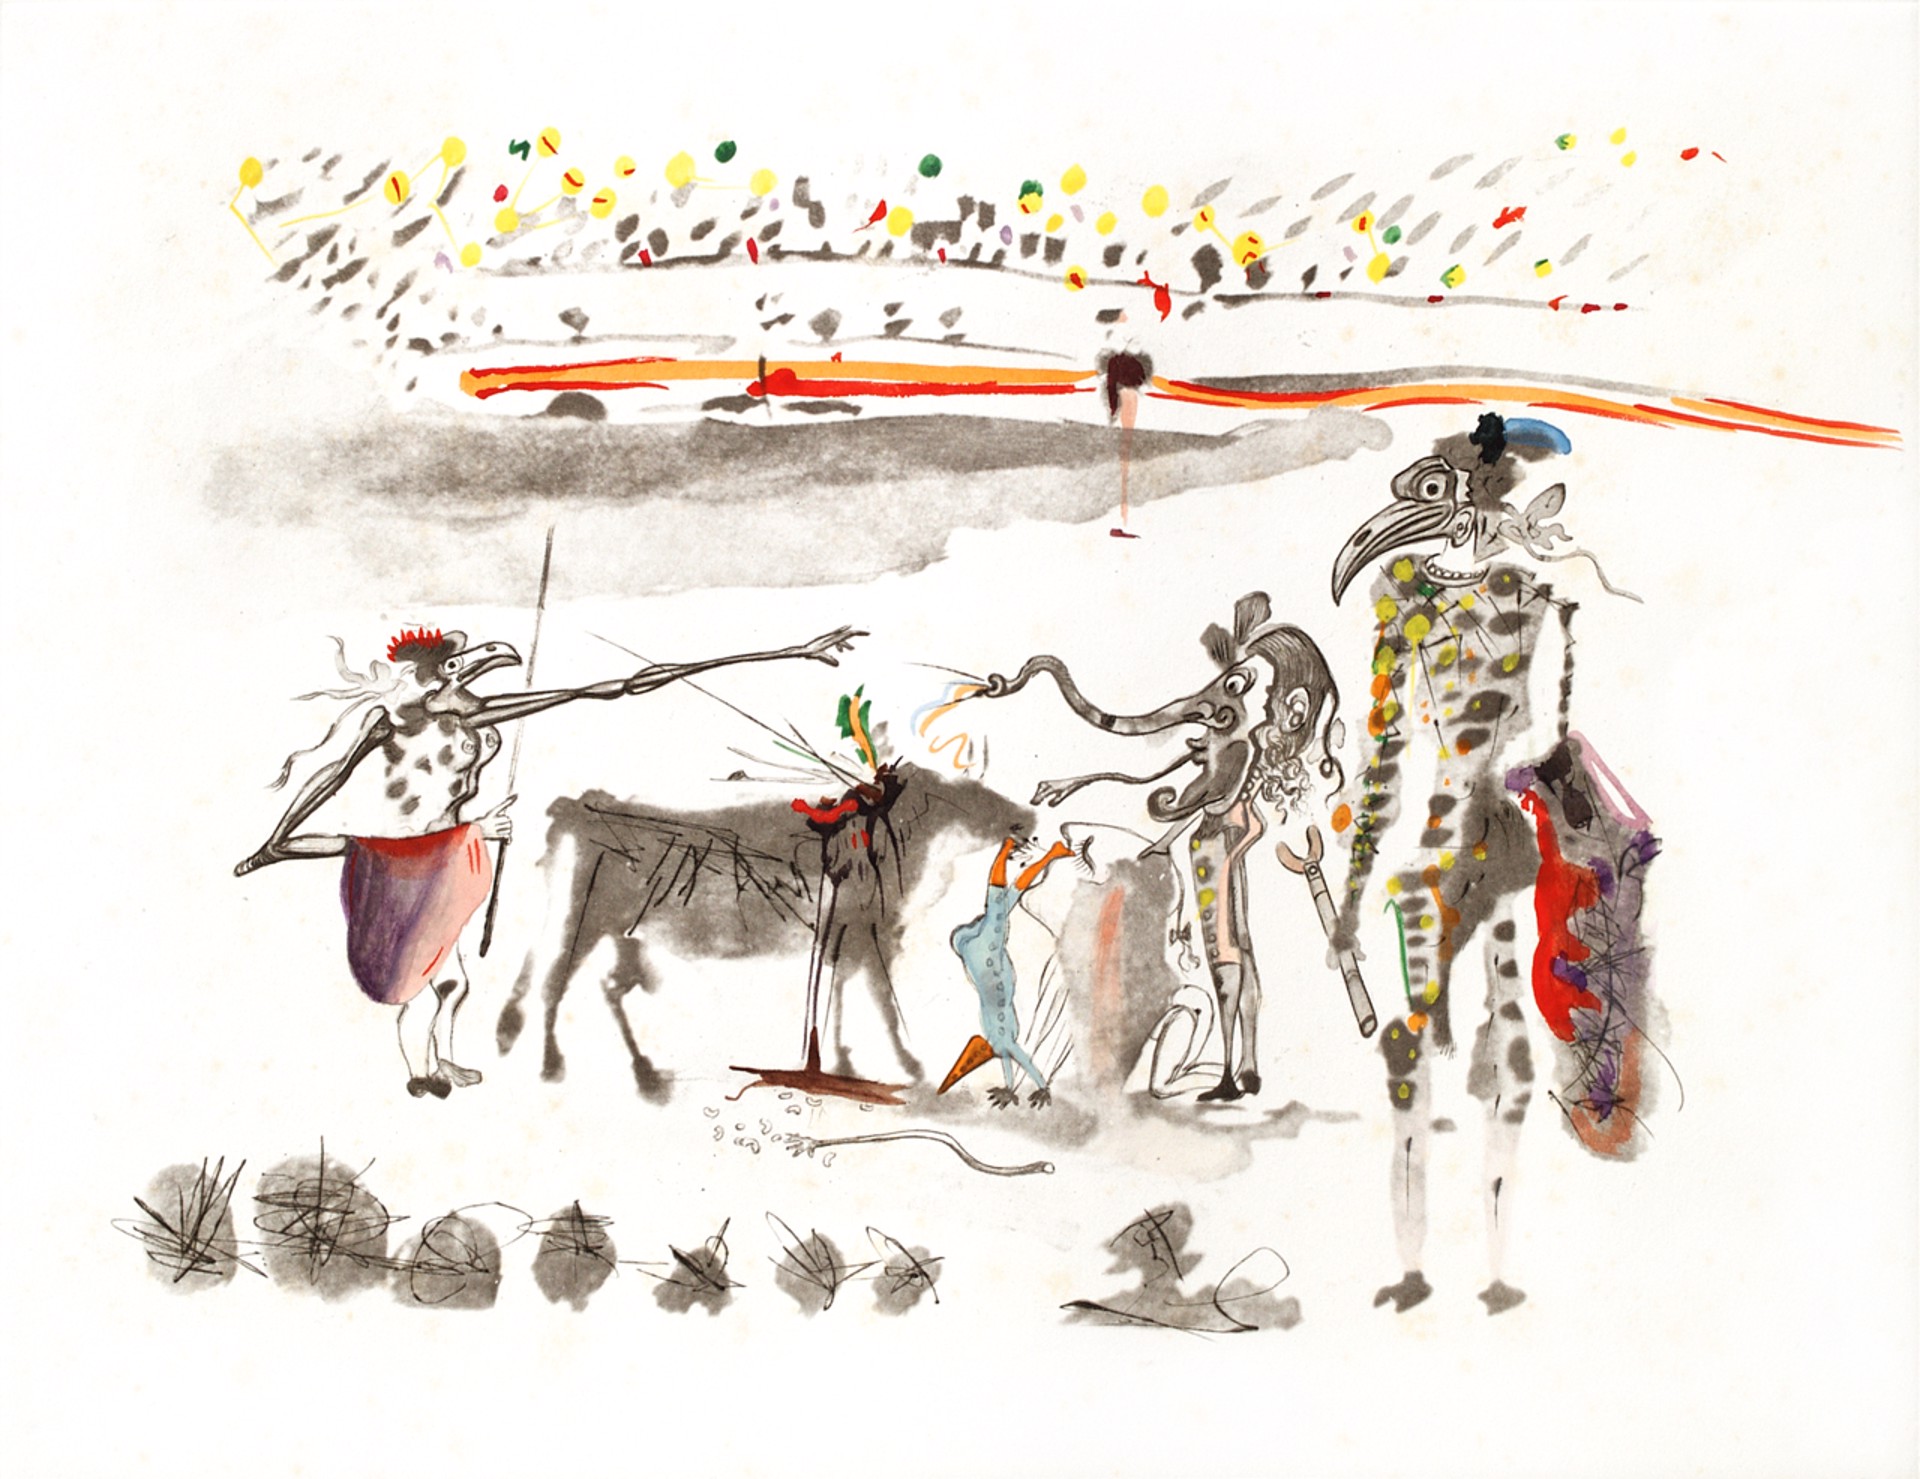 Surrealist Bullfight "Bullfight with Parrots" by Salvador Dali